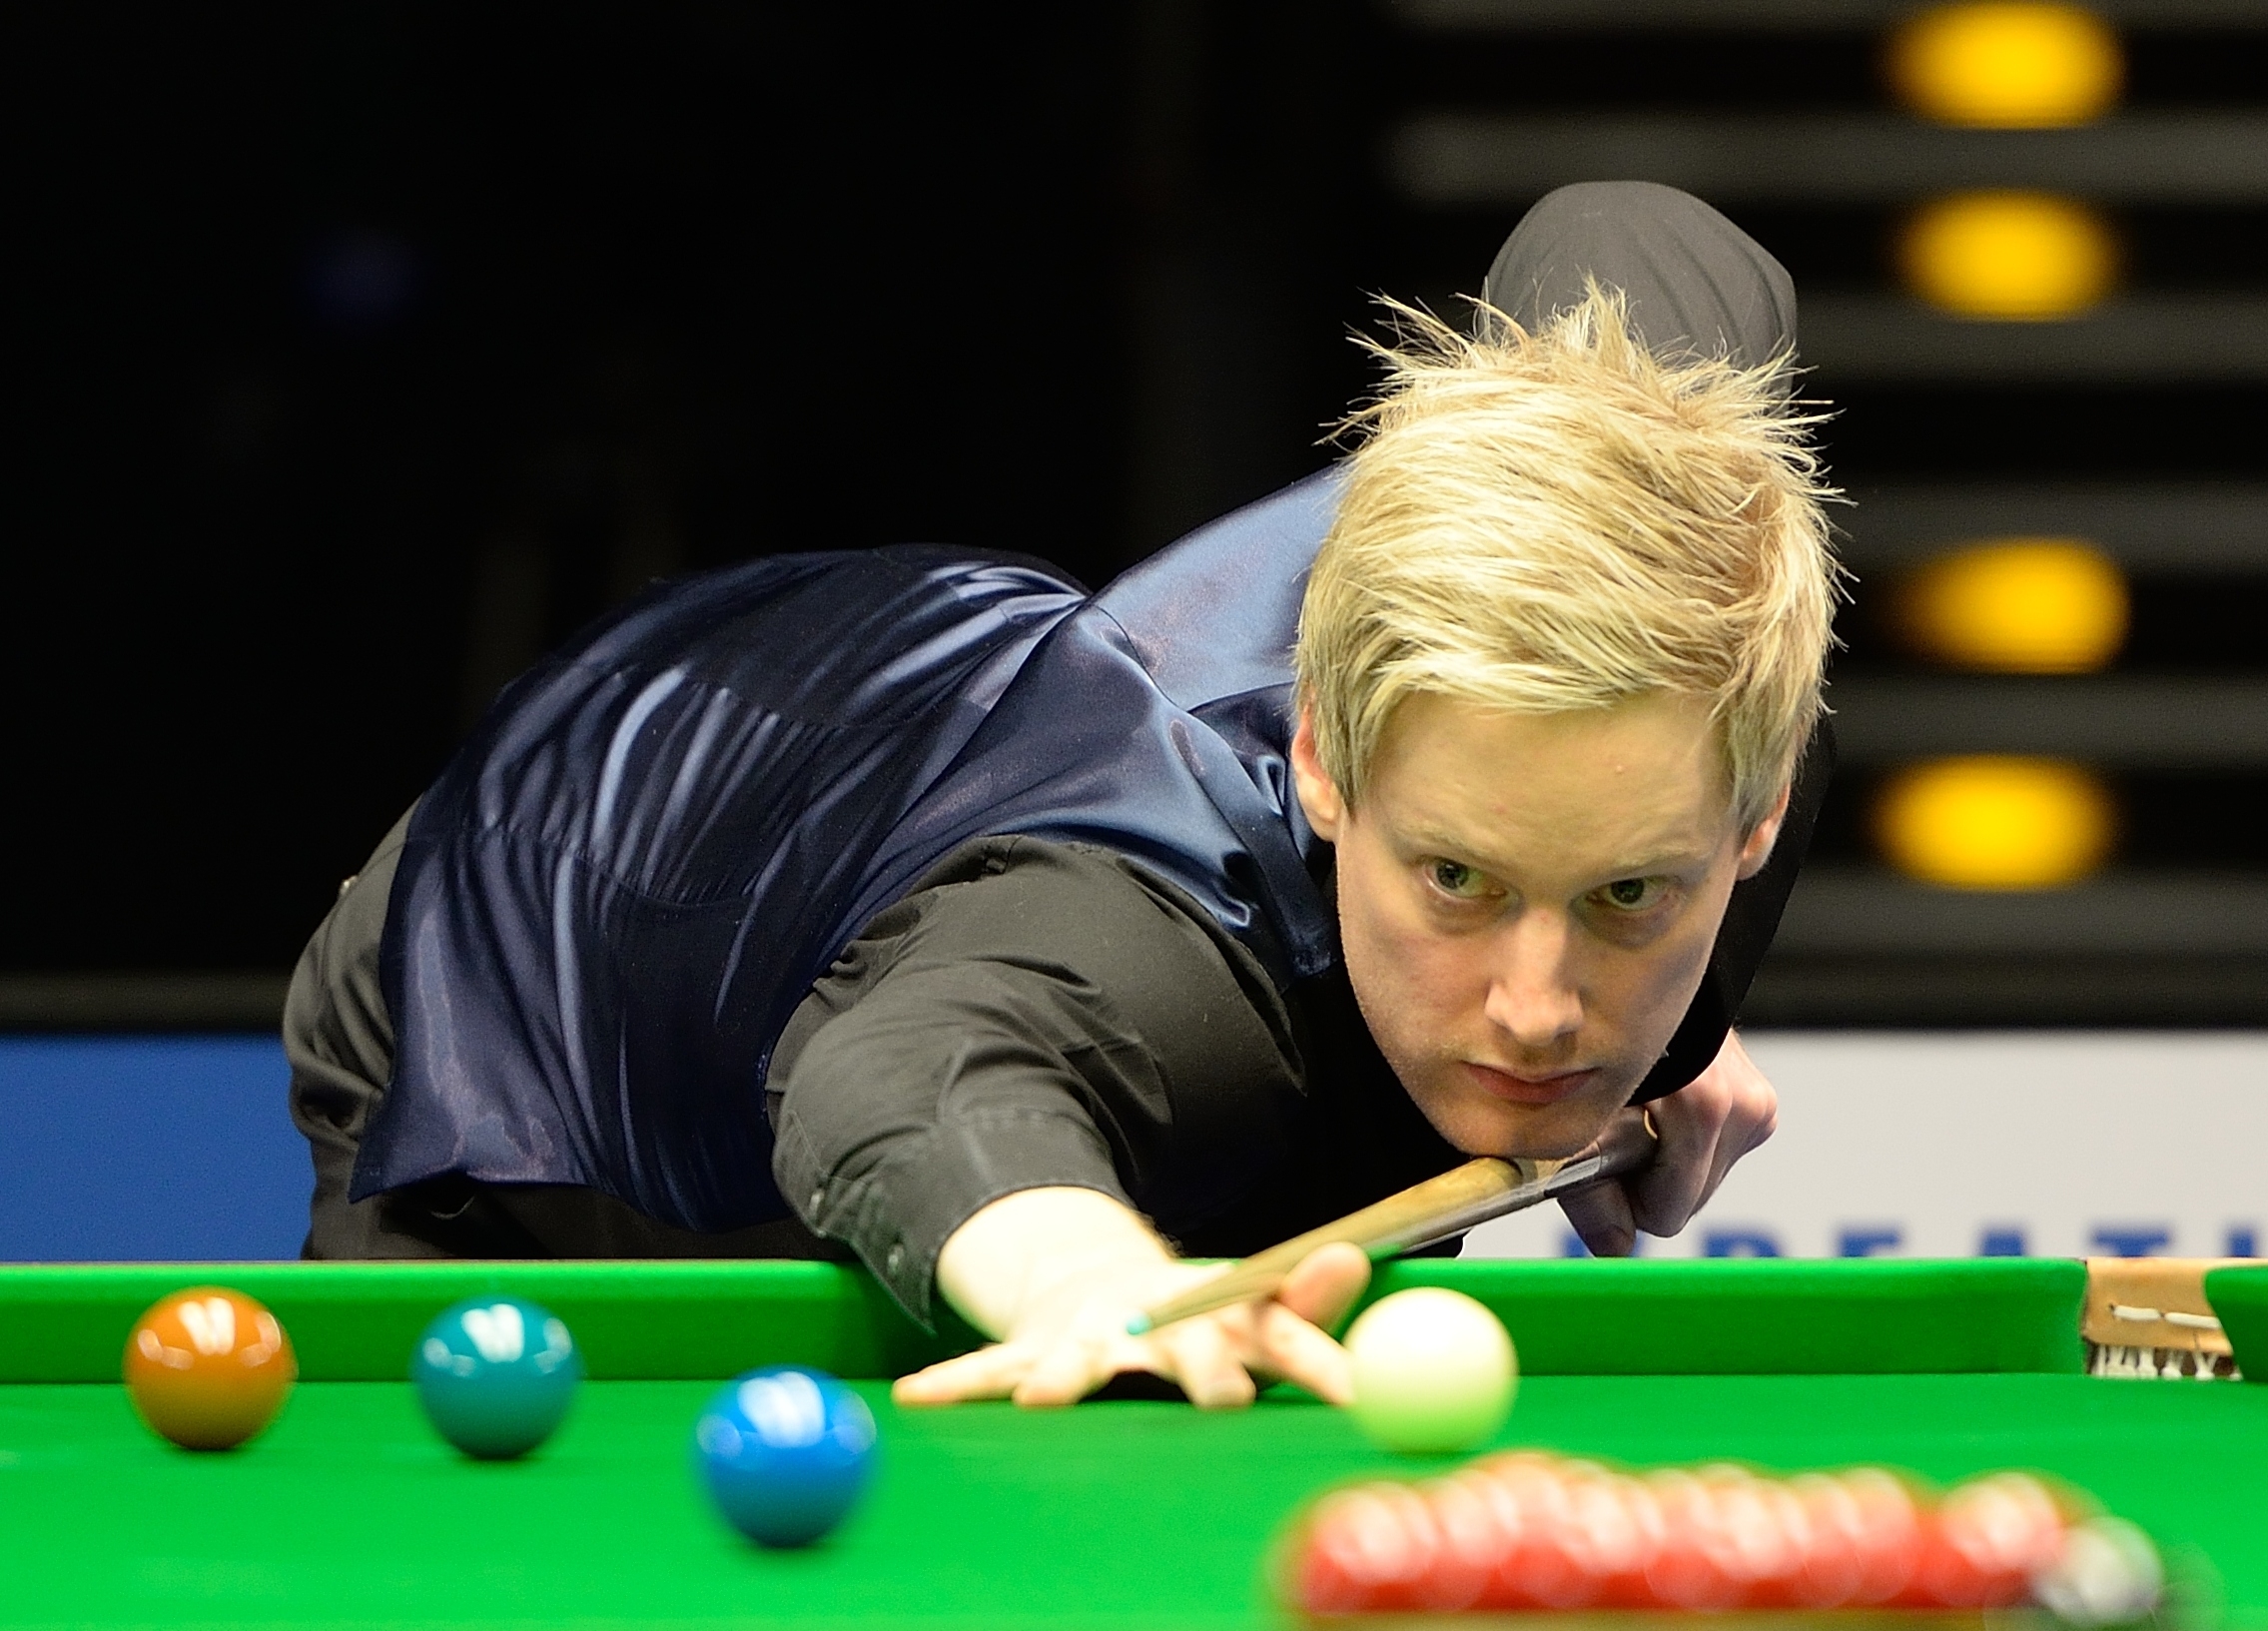 Neil Robertson - Wikipedia intended for Is That Neil Robertson Own Hair